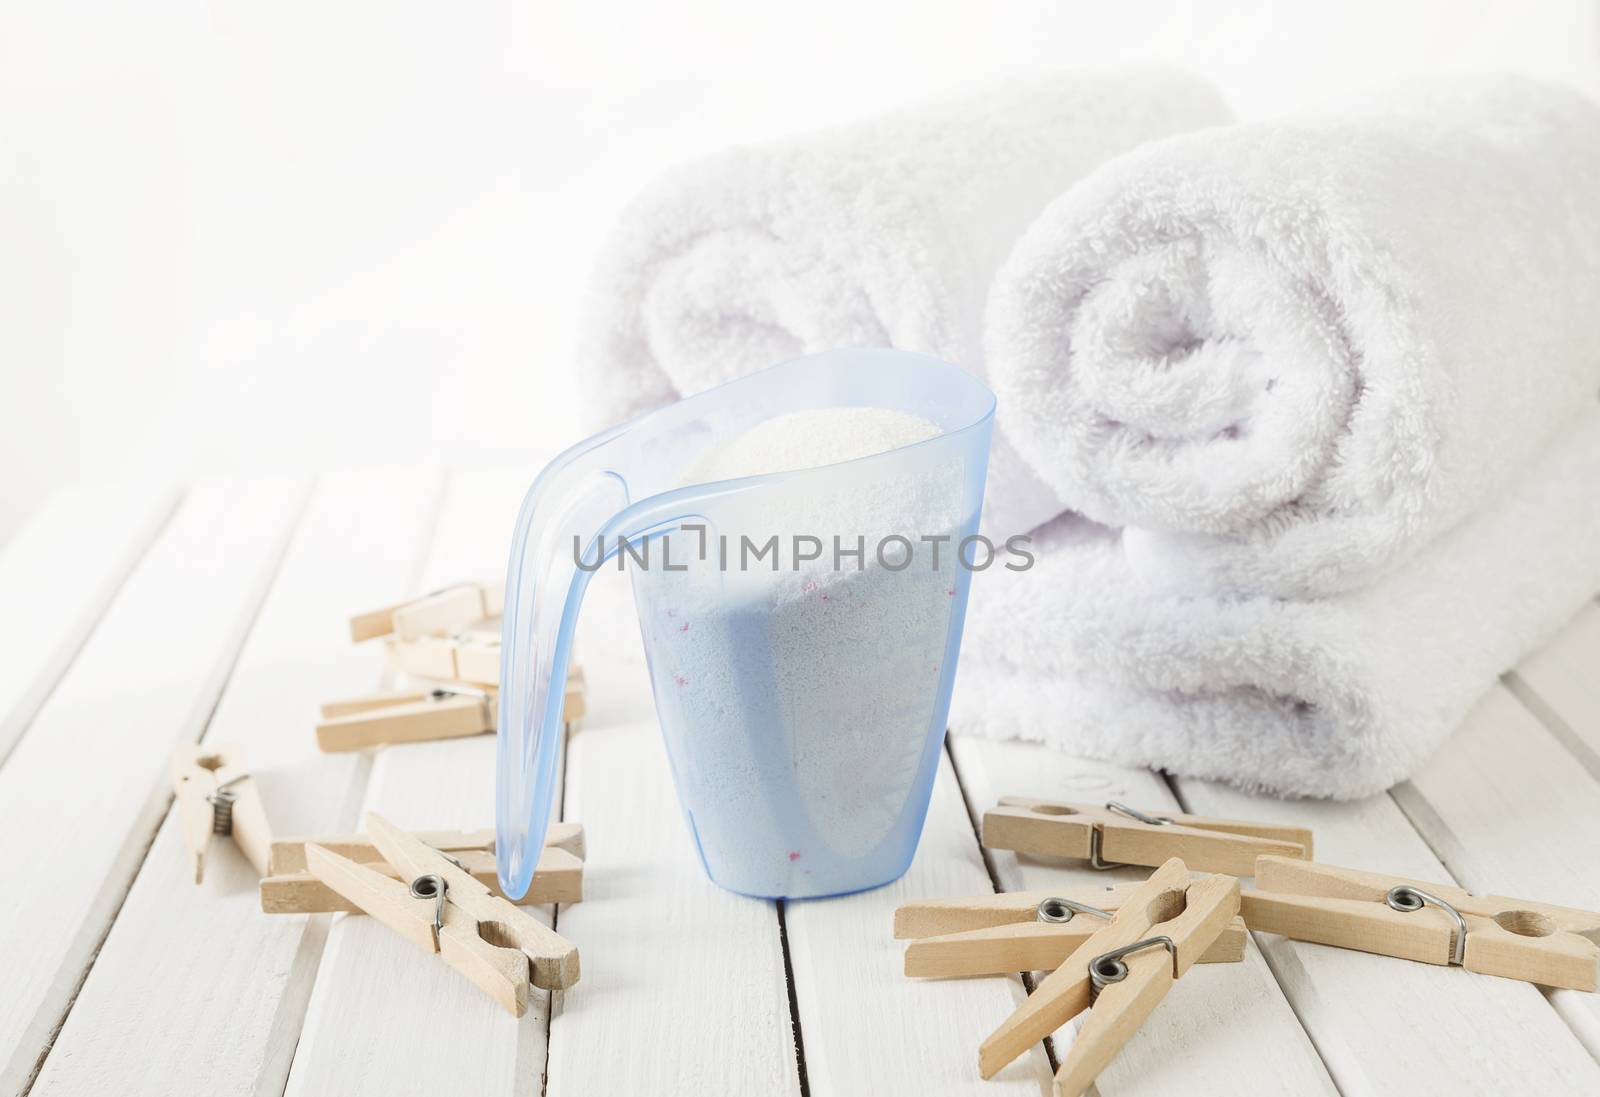 Bath towels, washing powder in measuring cup and wooden clothesp by Epitavi